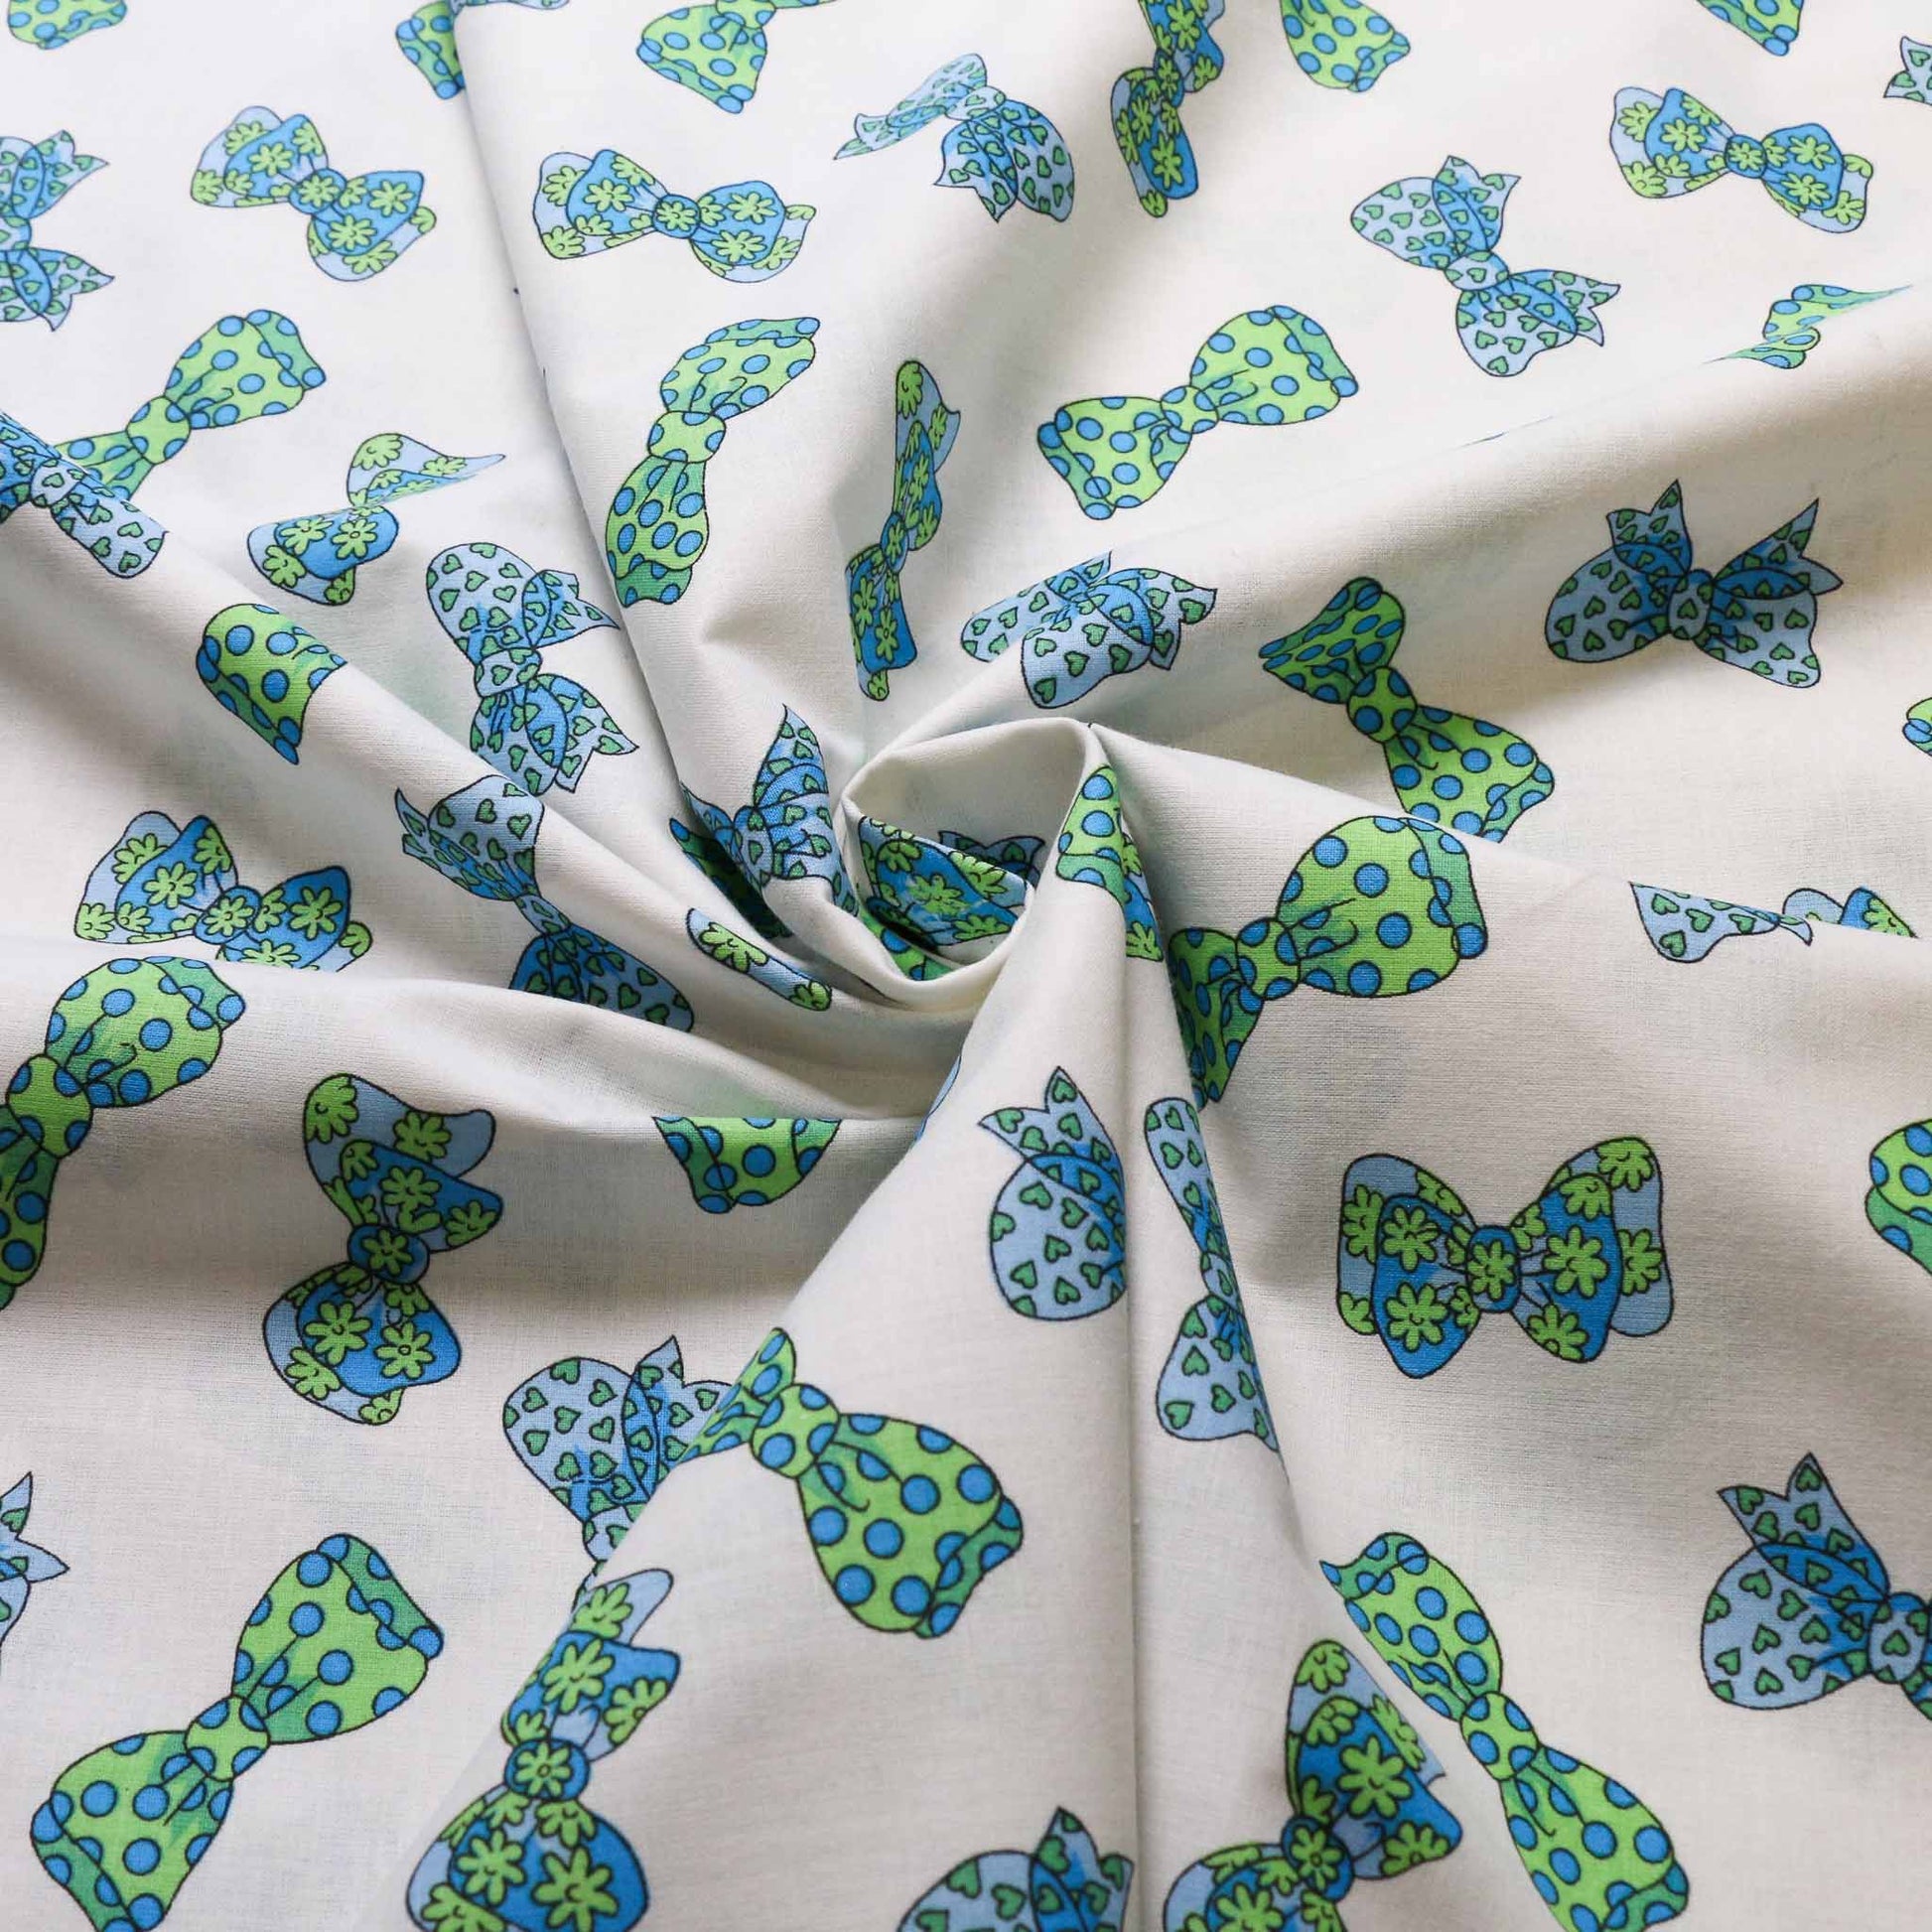 cotton deadstock retro fabric in white with green polka dot printed bow tie design from cloth control